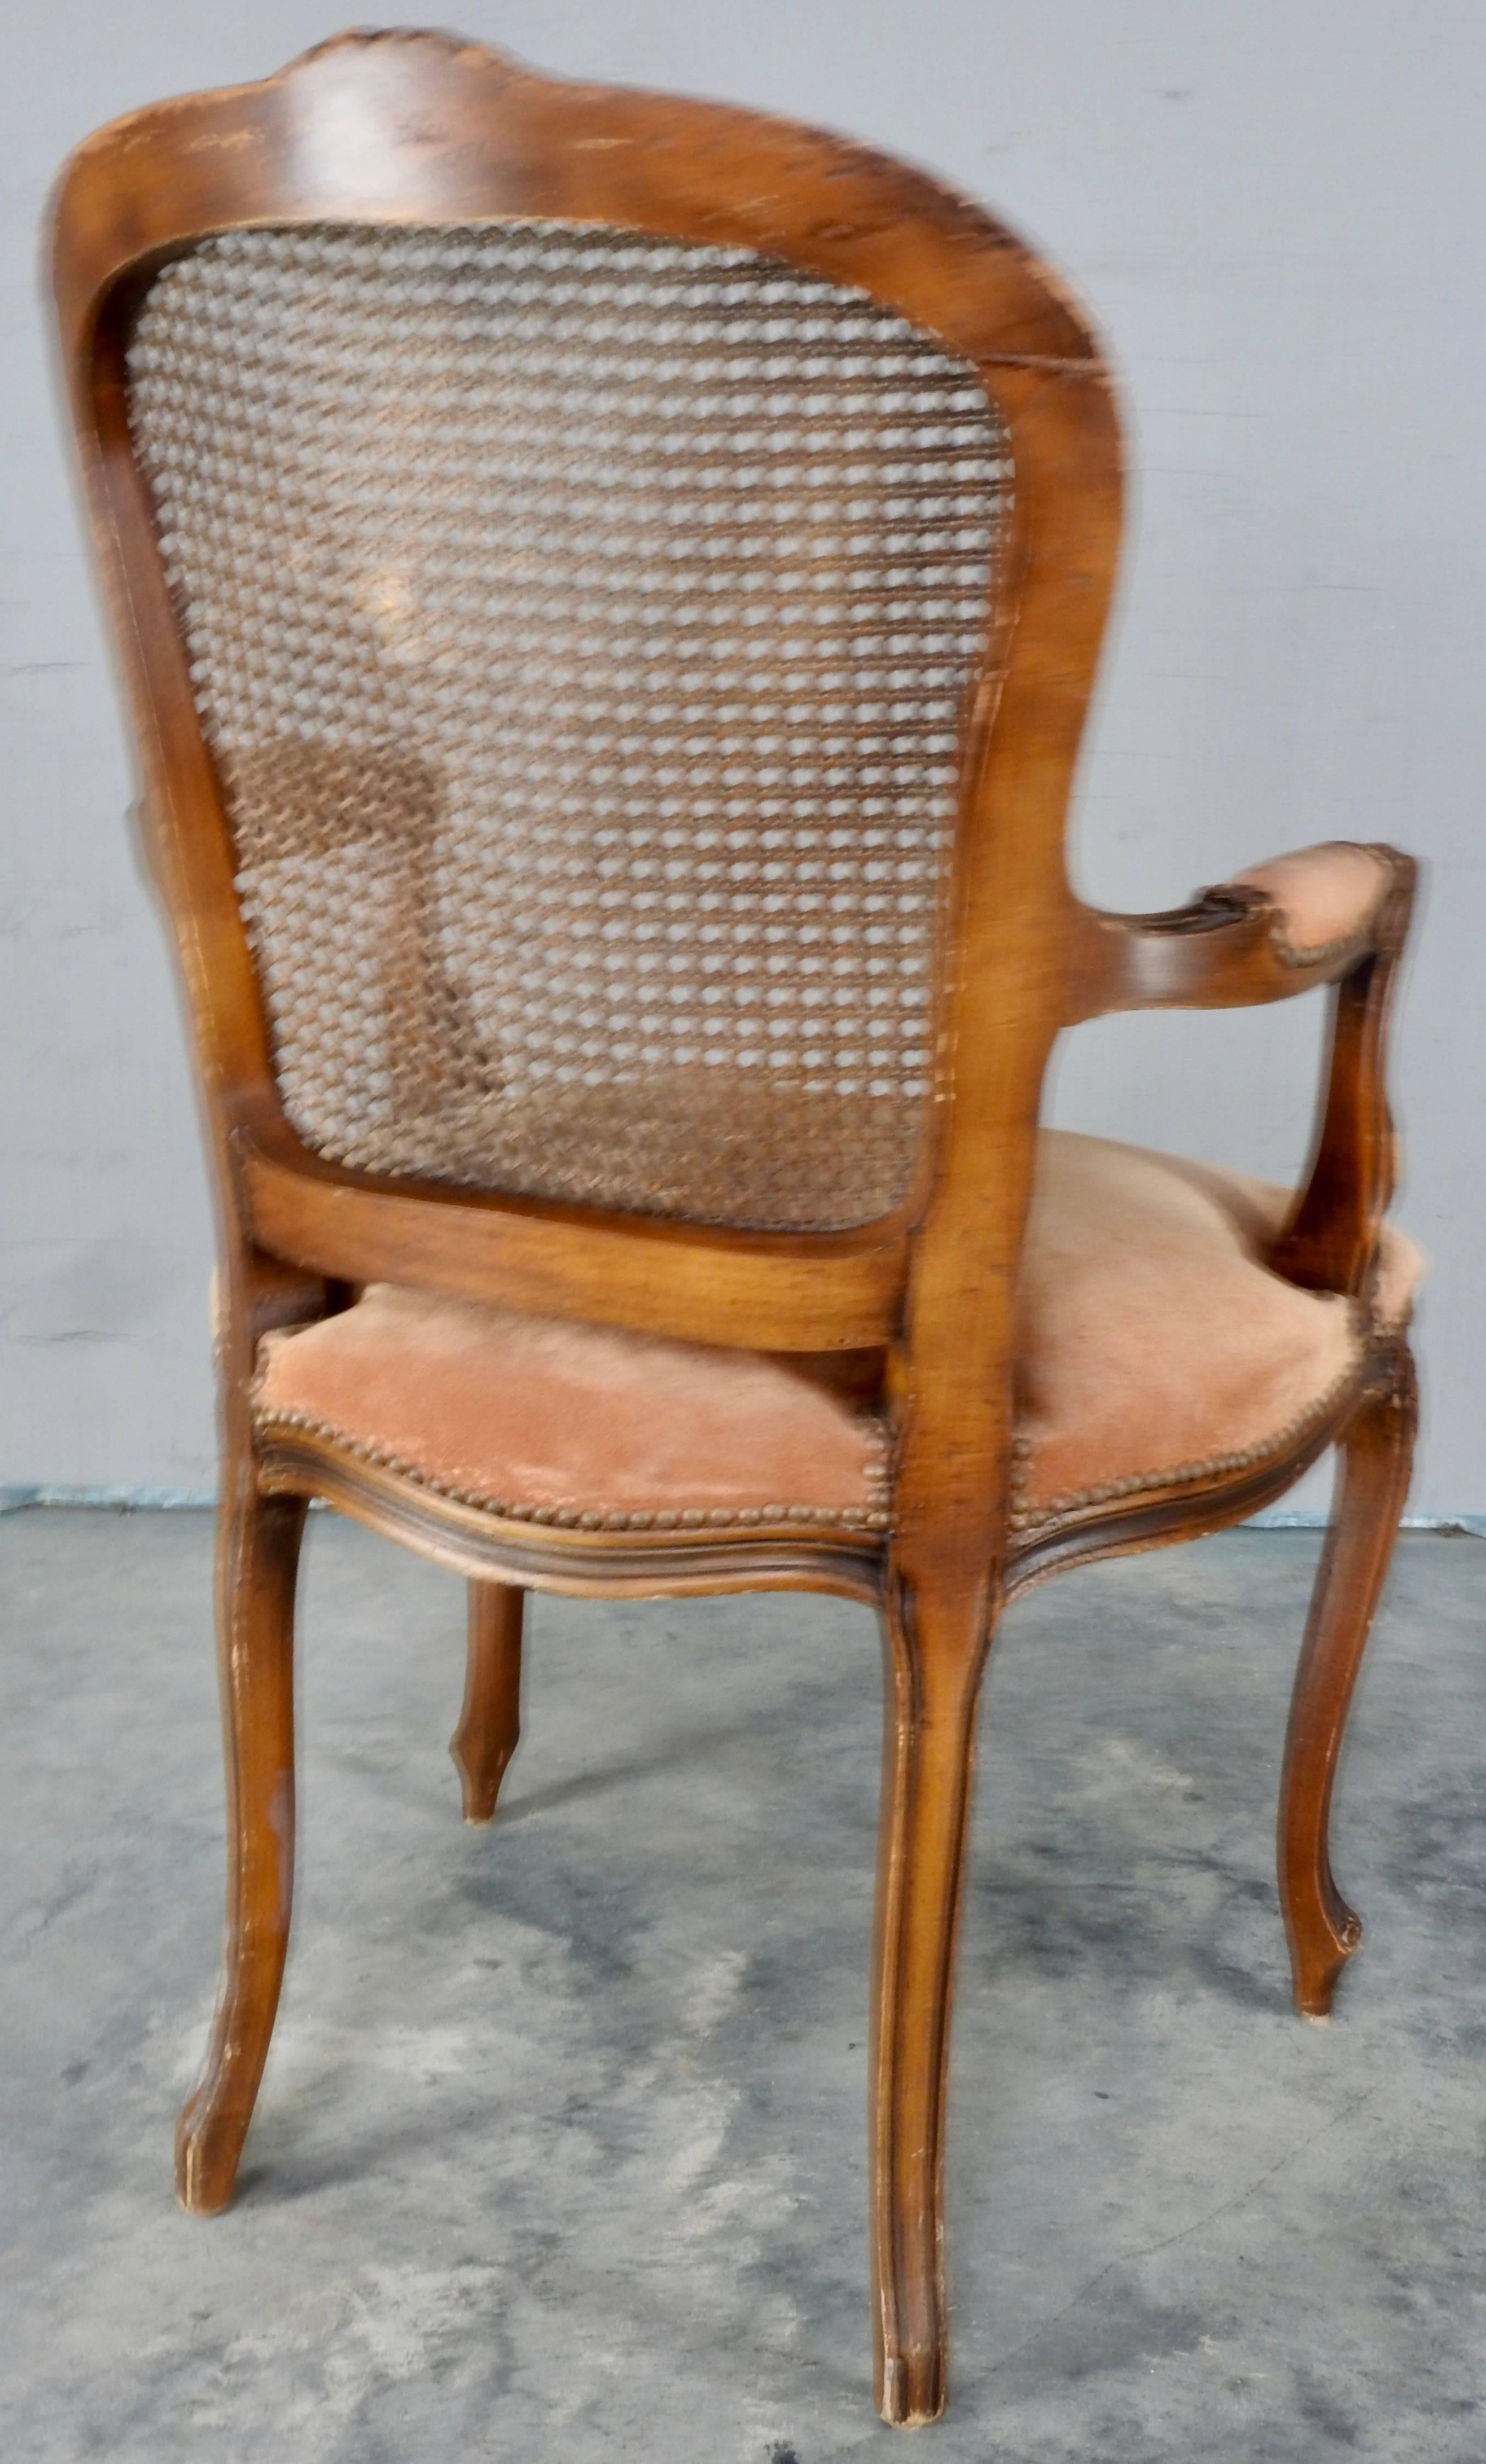 A caned back accents the back of this fauteuil from the 19th century in France. The seat has been covered in suede which is not original to the chair. The wood is carved with elegant flowers. Scrolled arms have suede arm rests. Bronze tacks finish